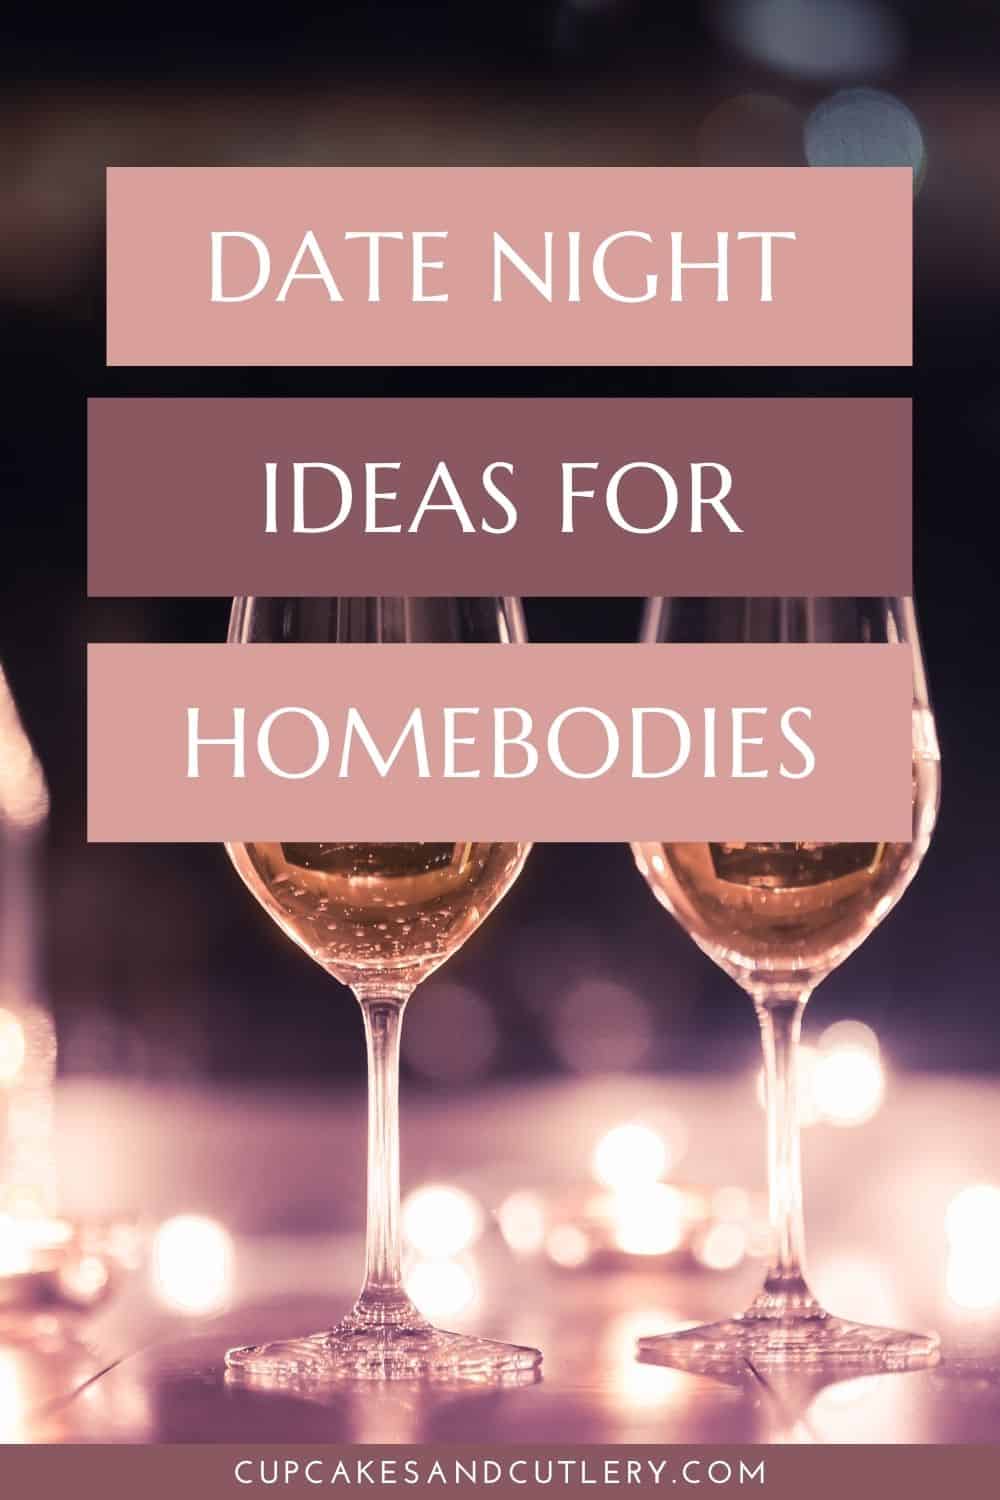 16 Date Night Ideas for Homebodies - Cupcakes and Cutlery